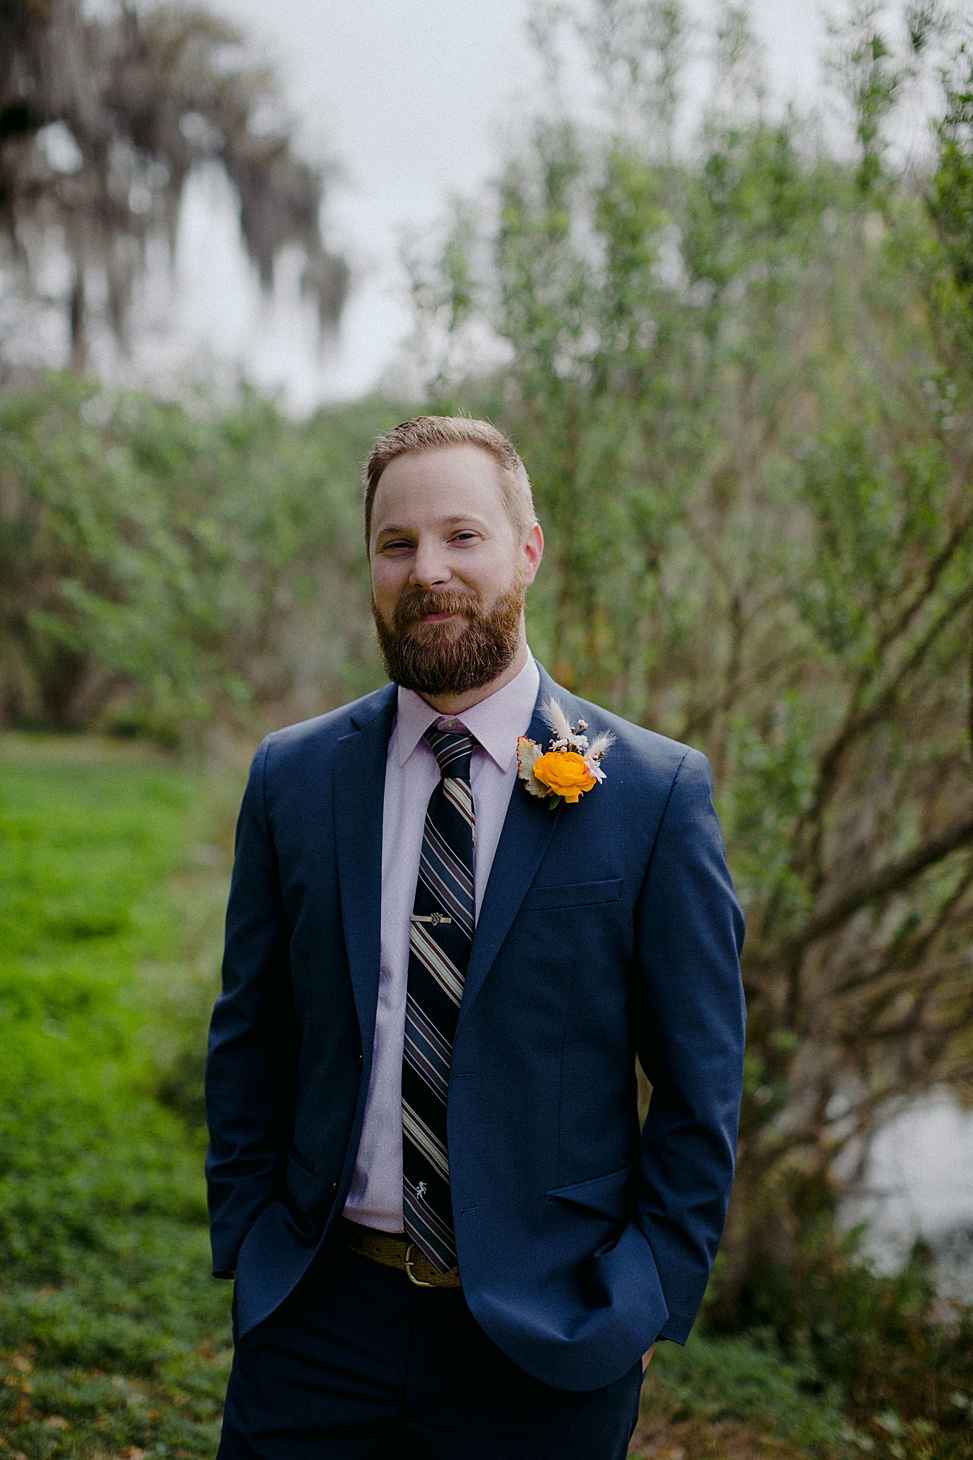 The groom was wearing a navy suit, a blush shirt and a striped tie plus a bright boutonniere